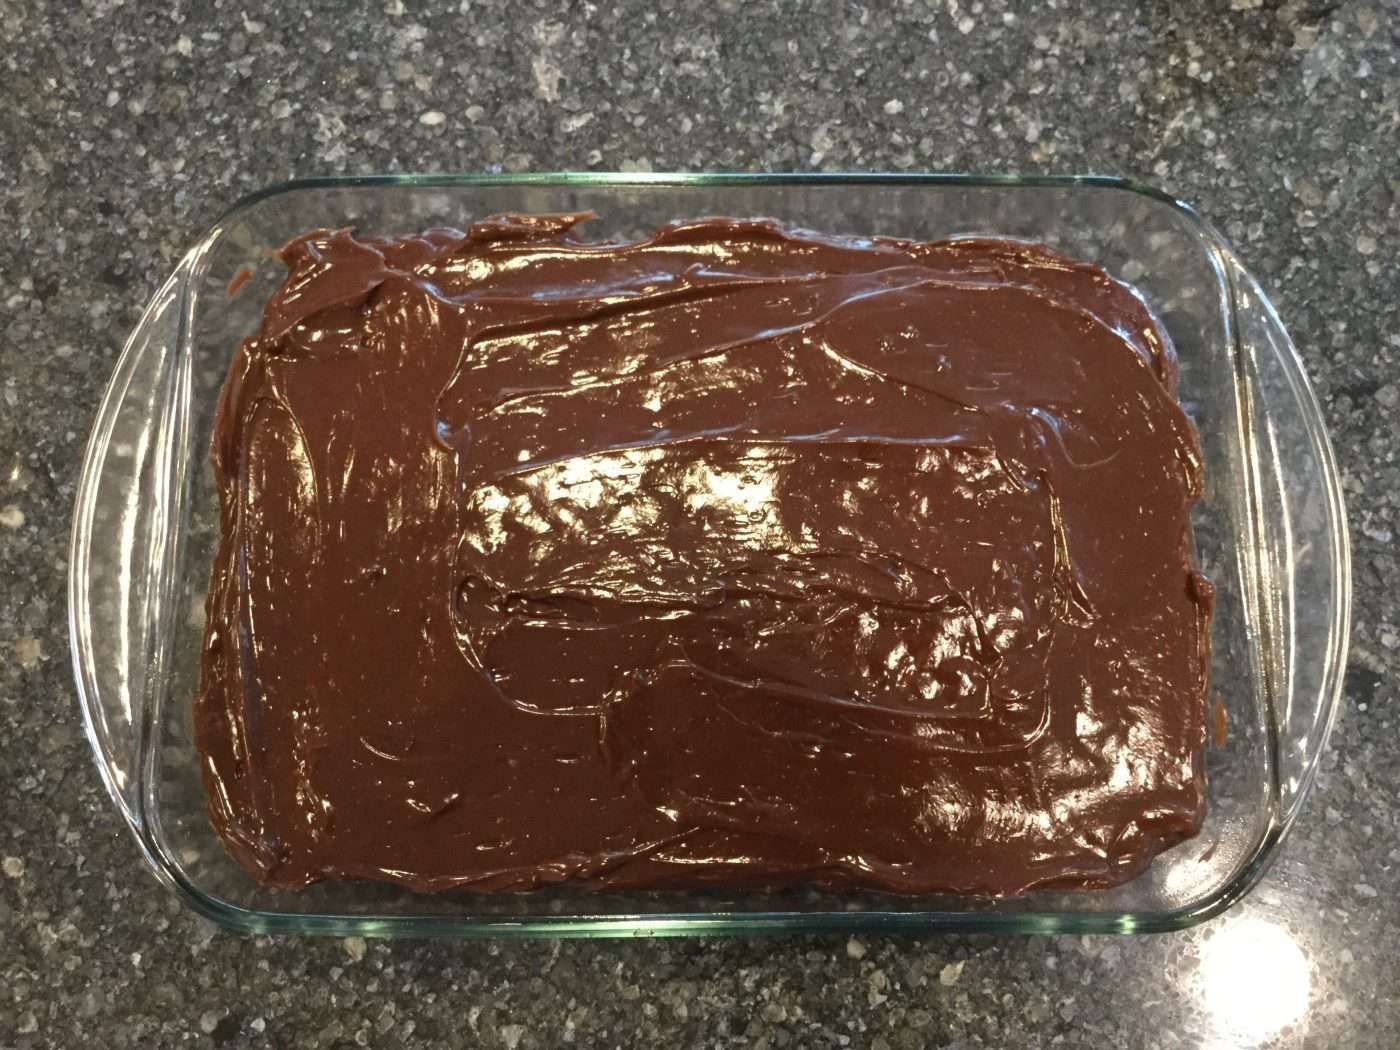 Spread the chocolate pudding on next and cover the cake completely.